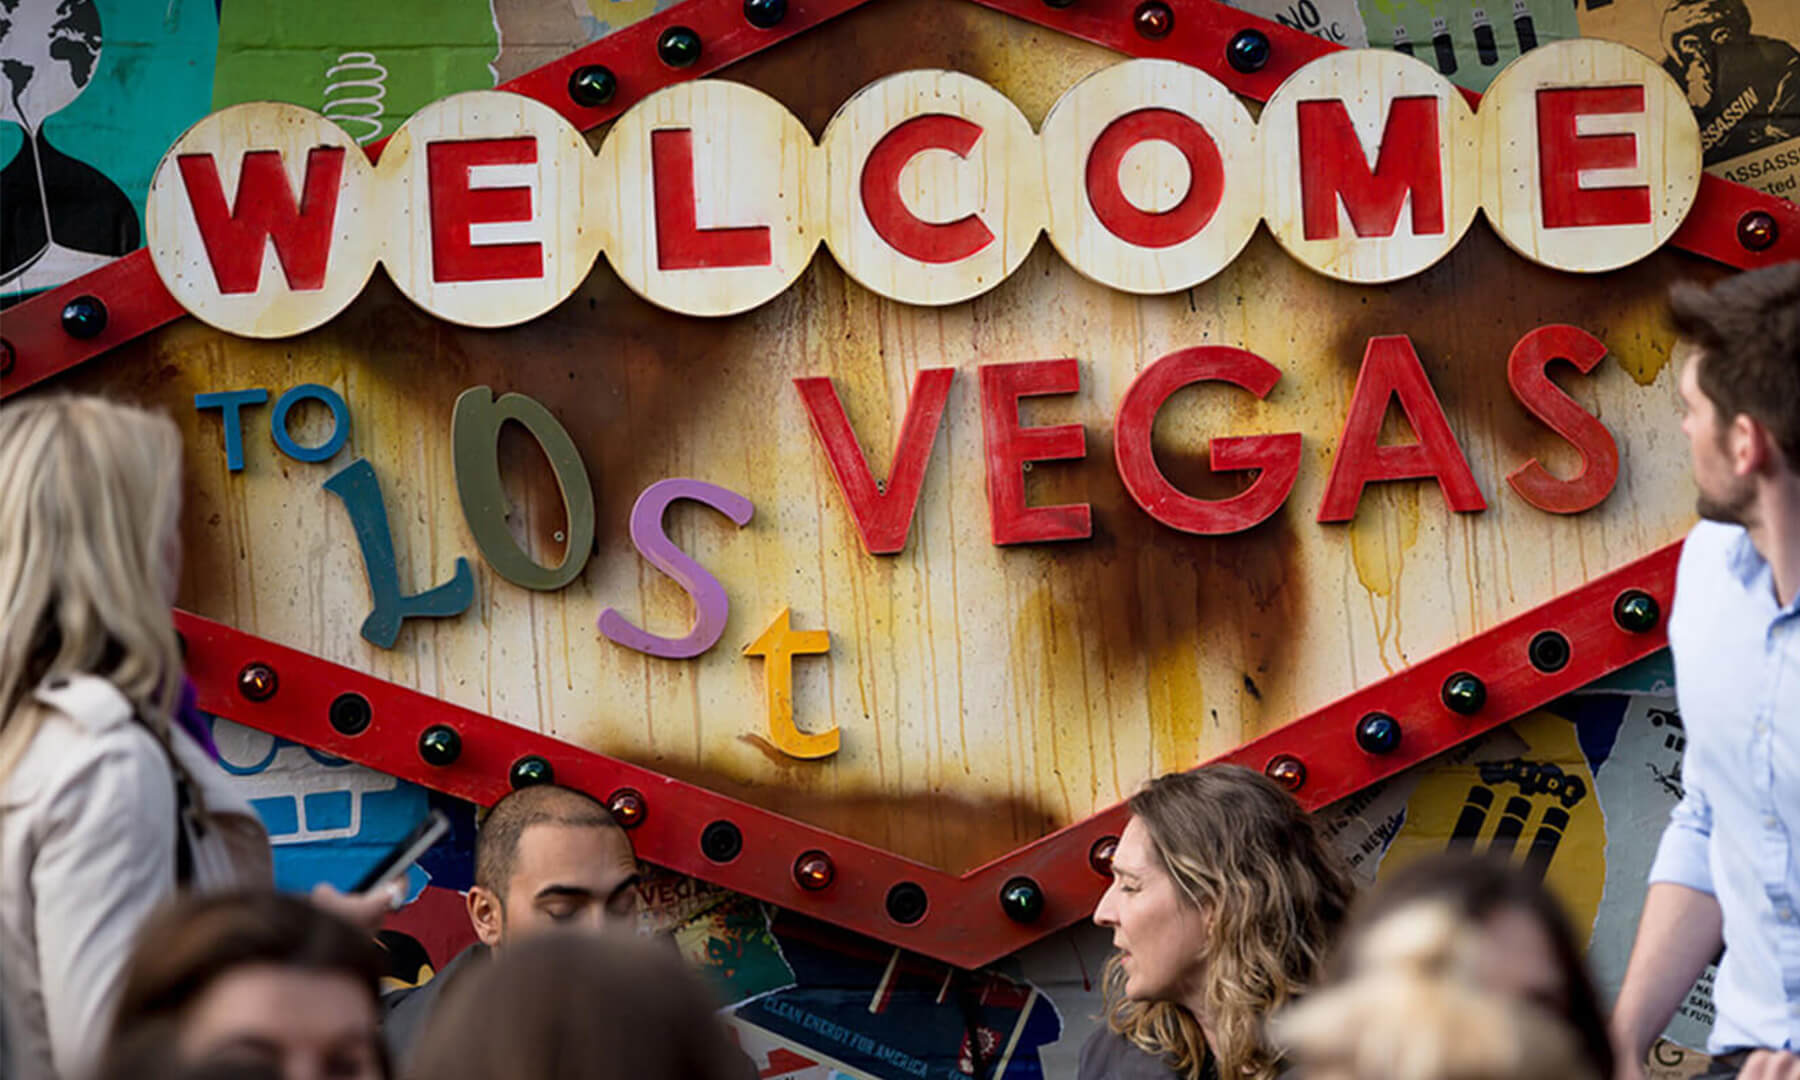 'Welcome to Lost Vegas' sign in Shoreditch